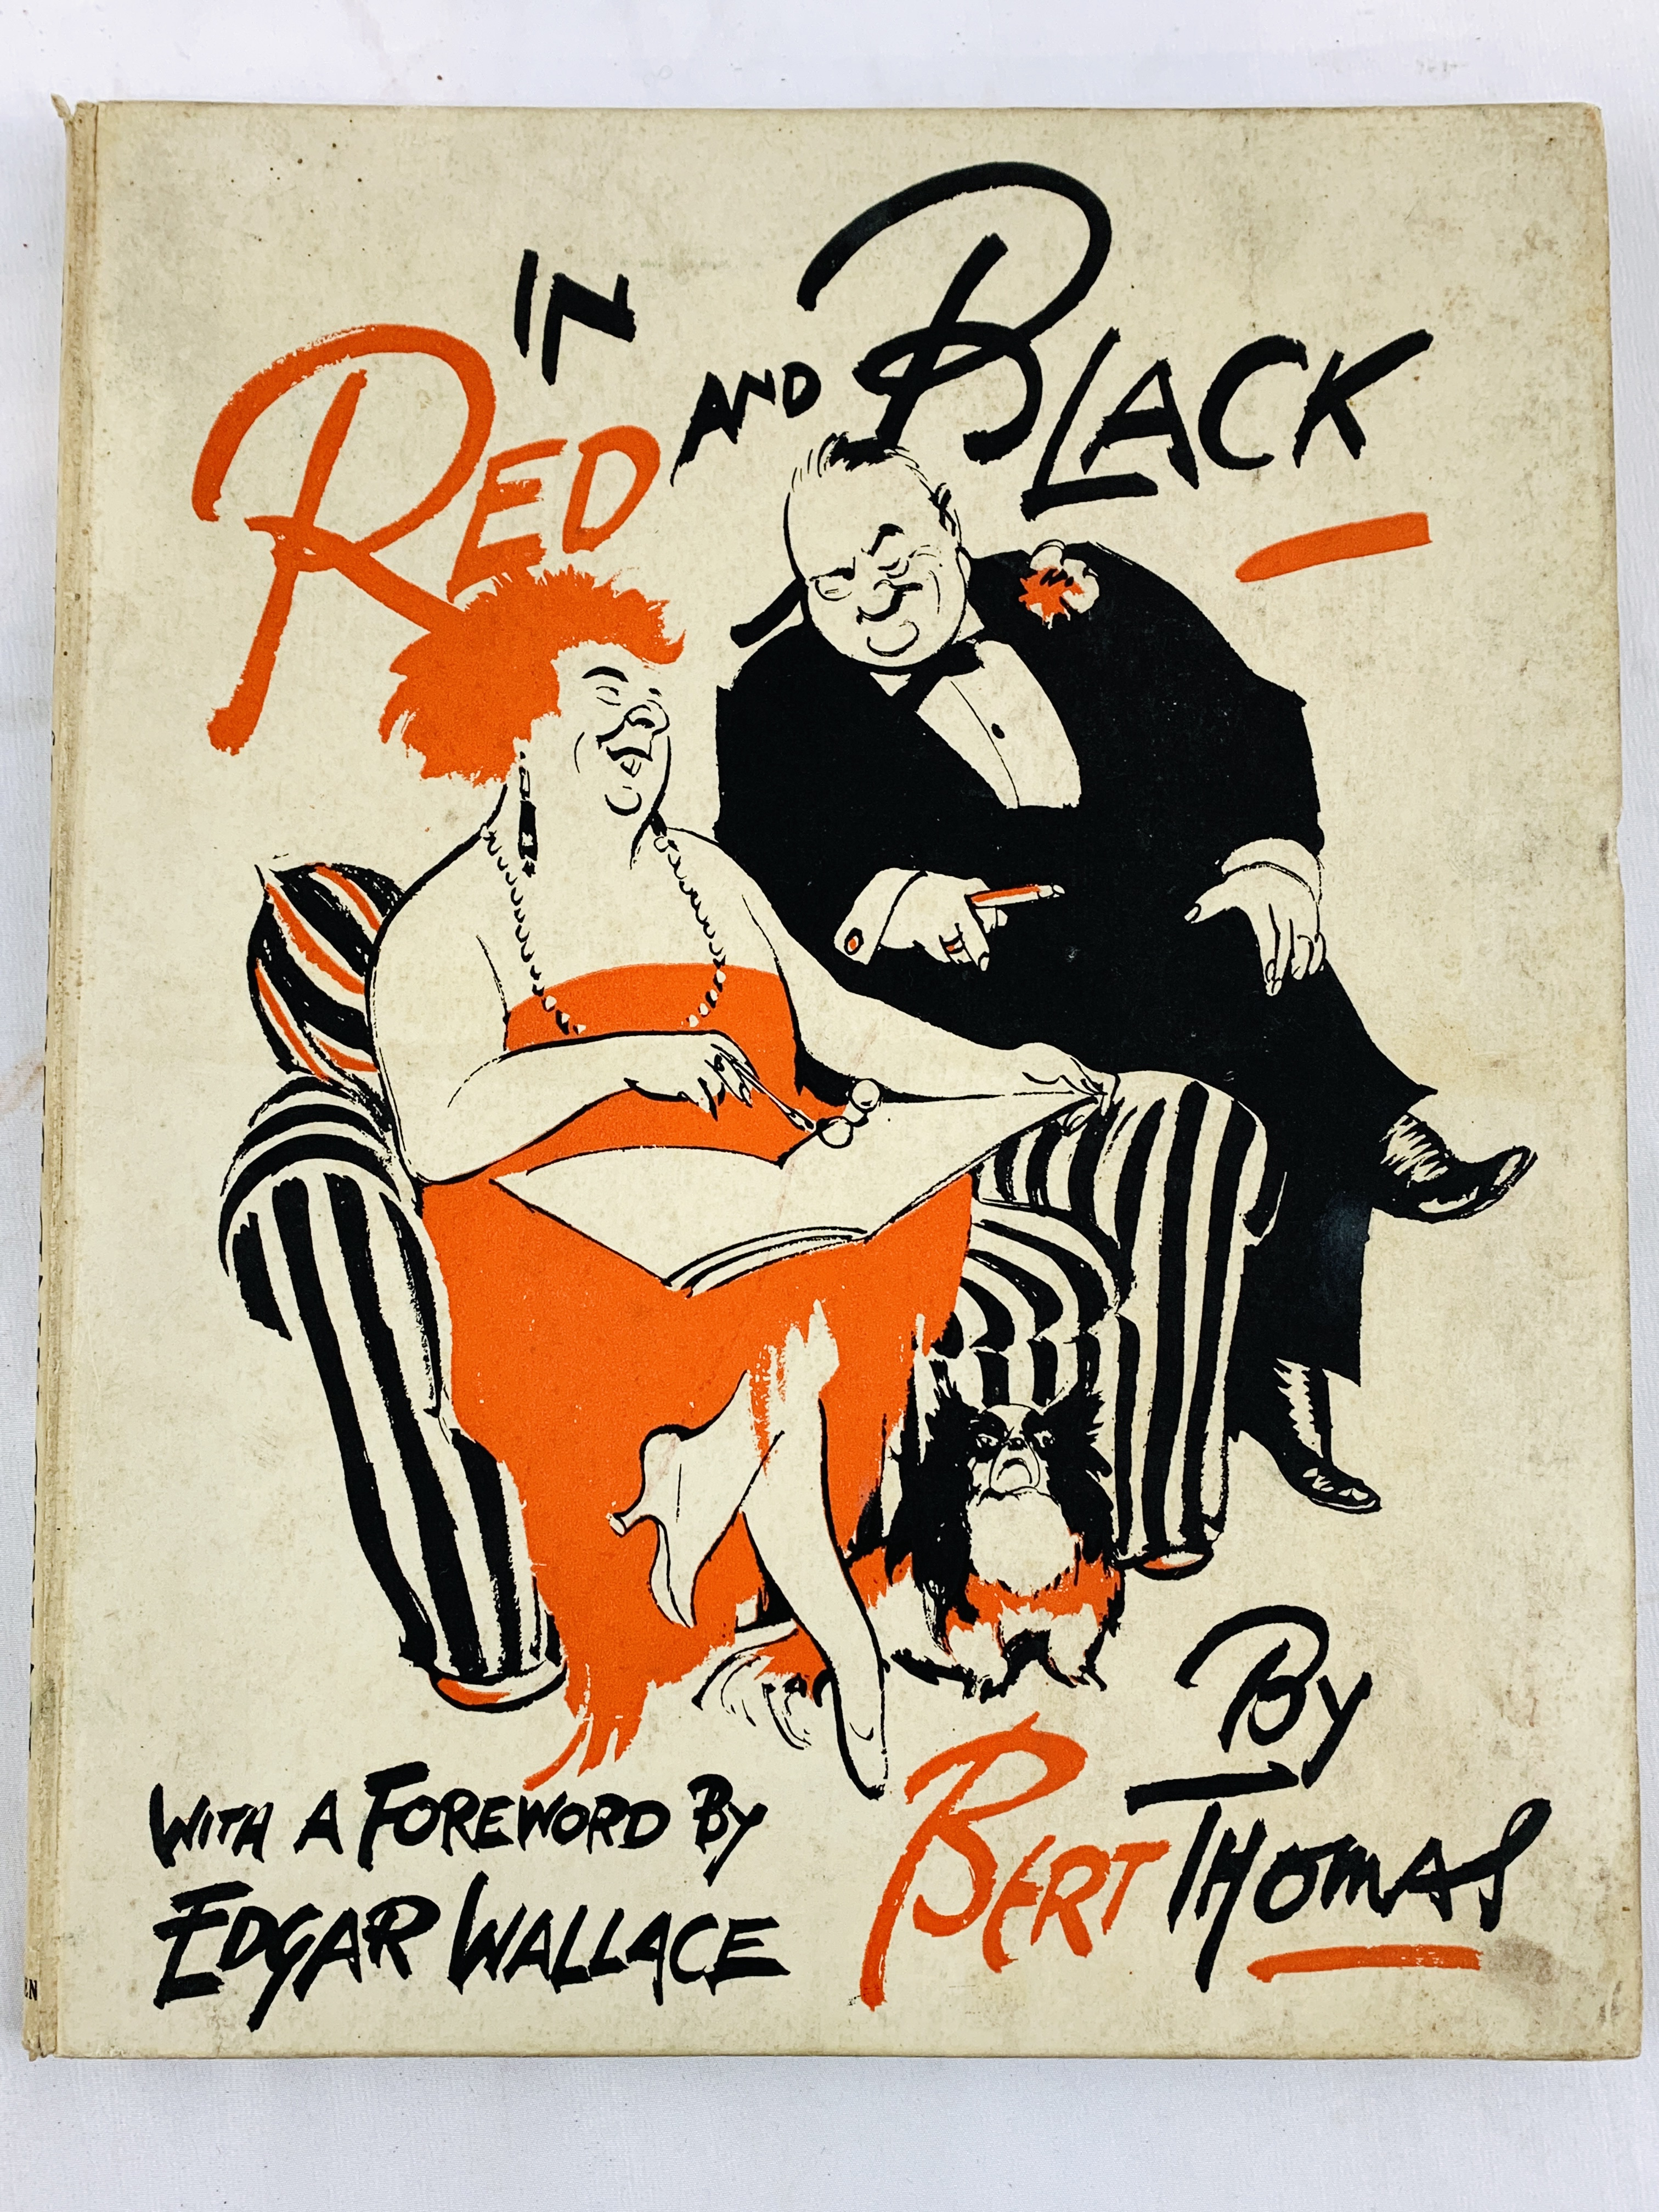 "In Red and Black", by Bert Thomas, with "Taken from Life" by George Belcher - Image 2 of 7